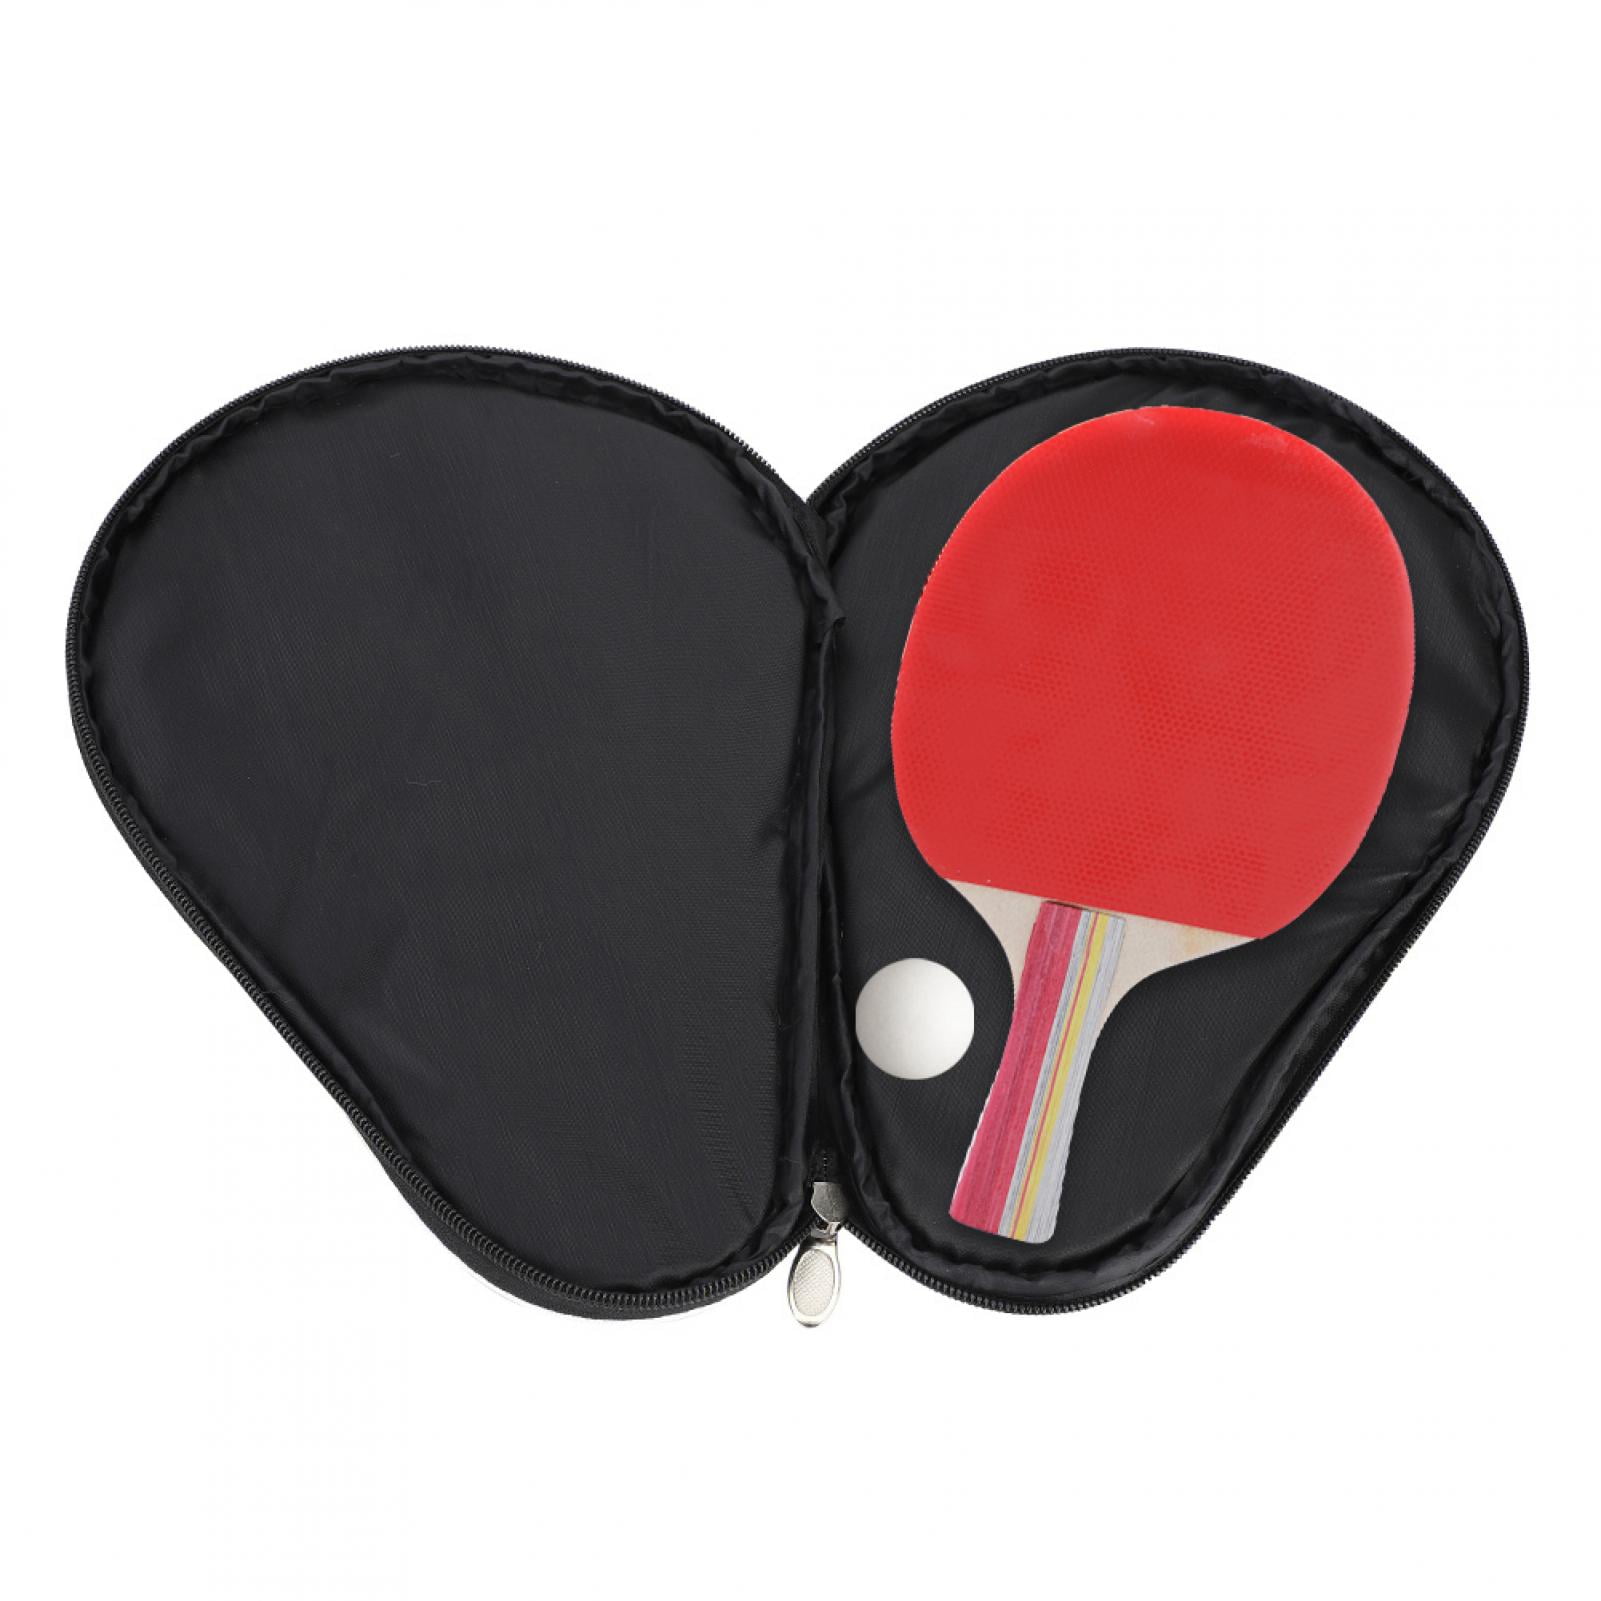 Nice Quality Ping Pong Racket Table Tennis Paddle Bat cover bag Case pouch 